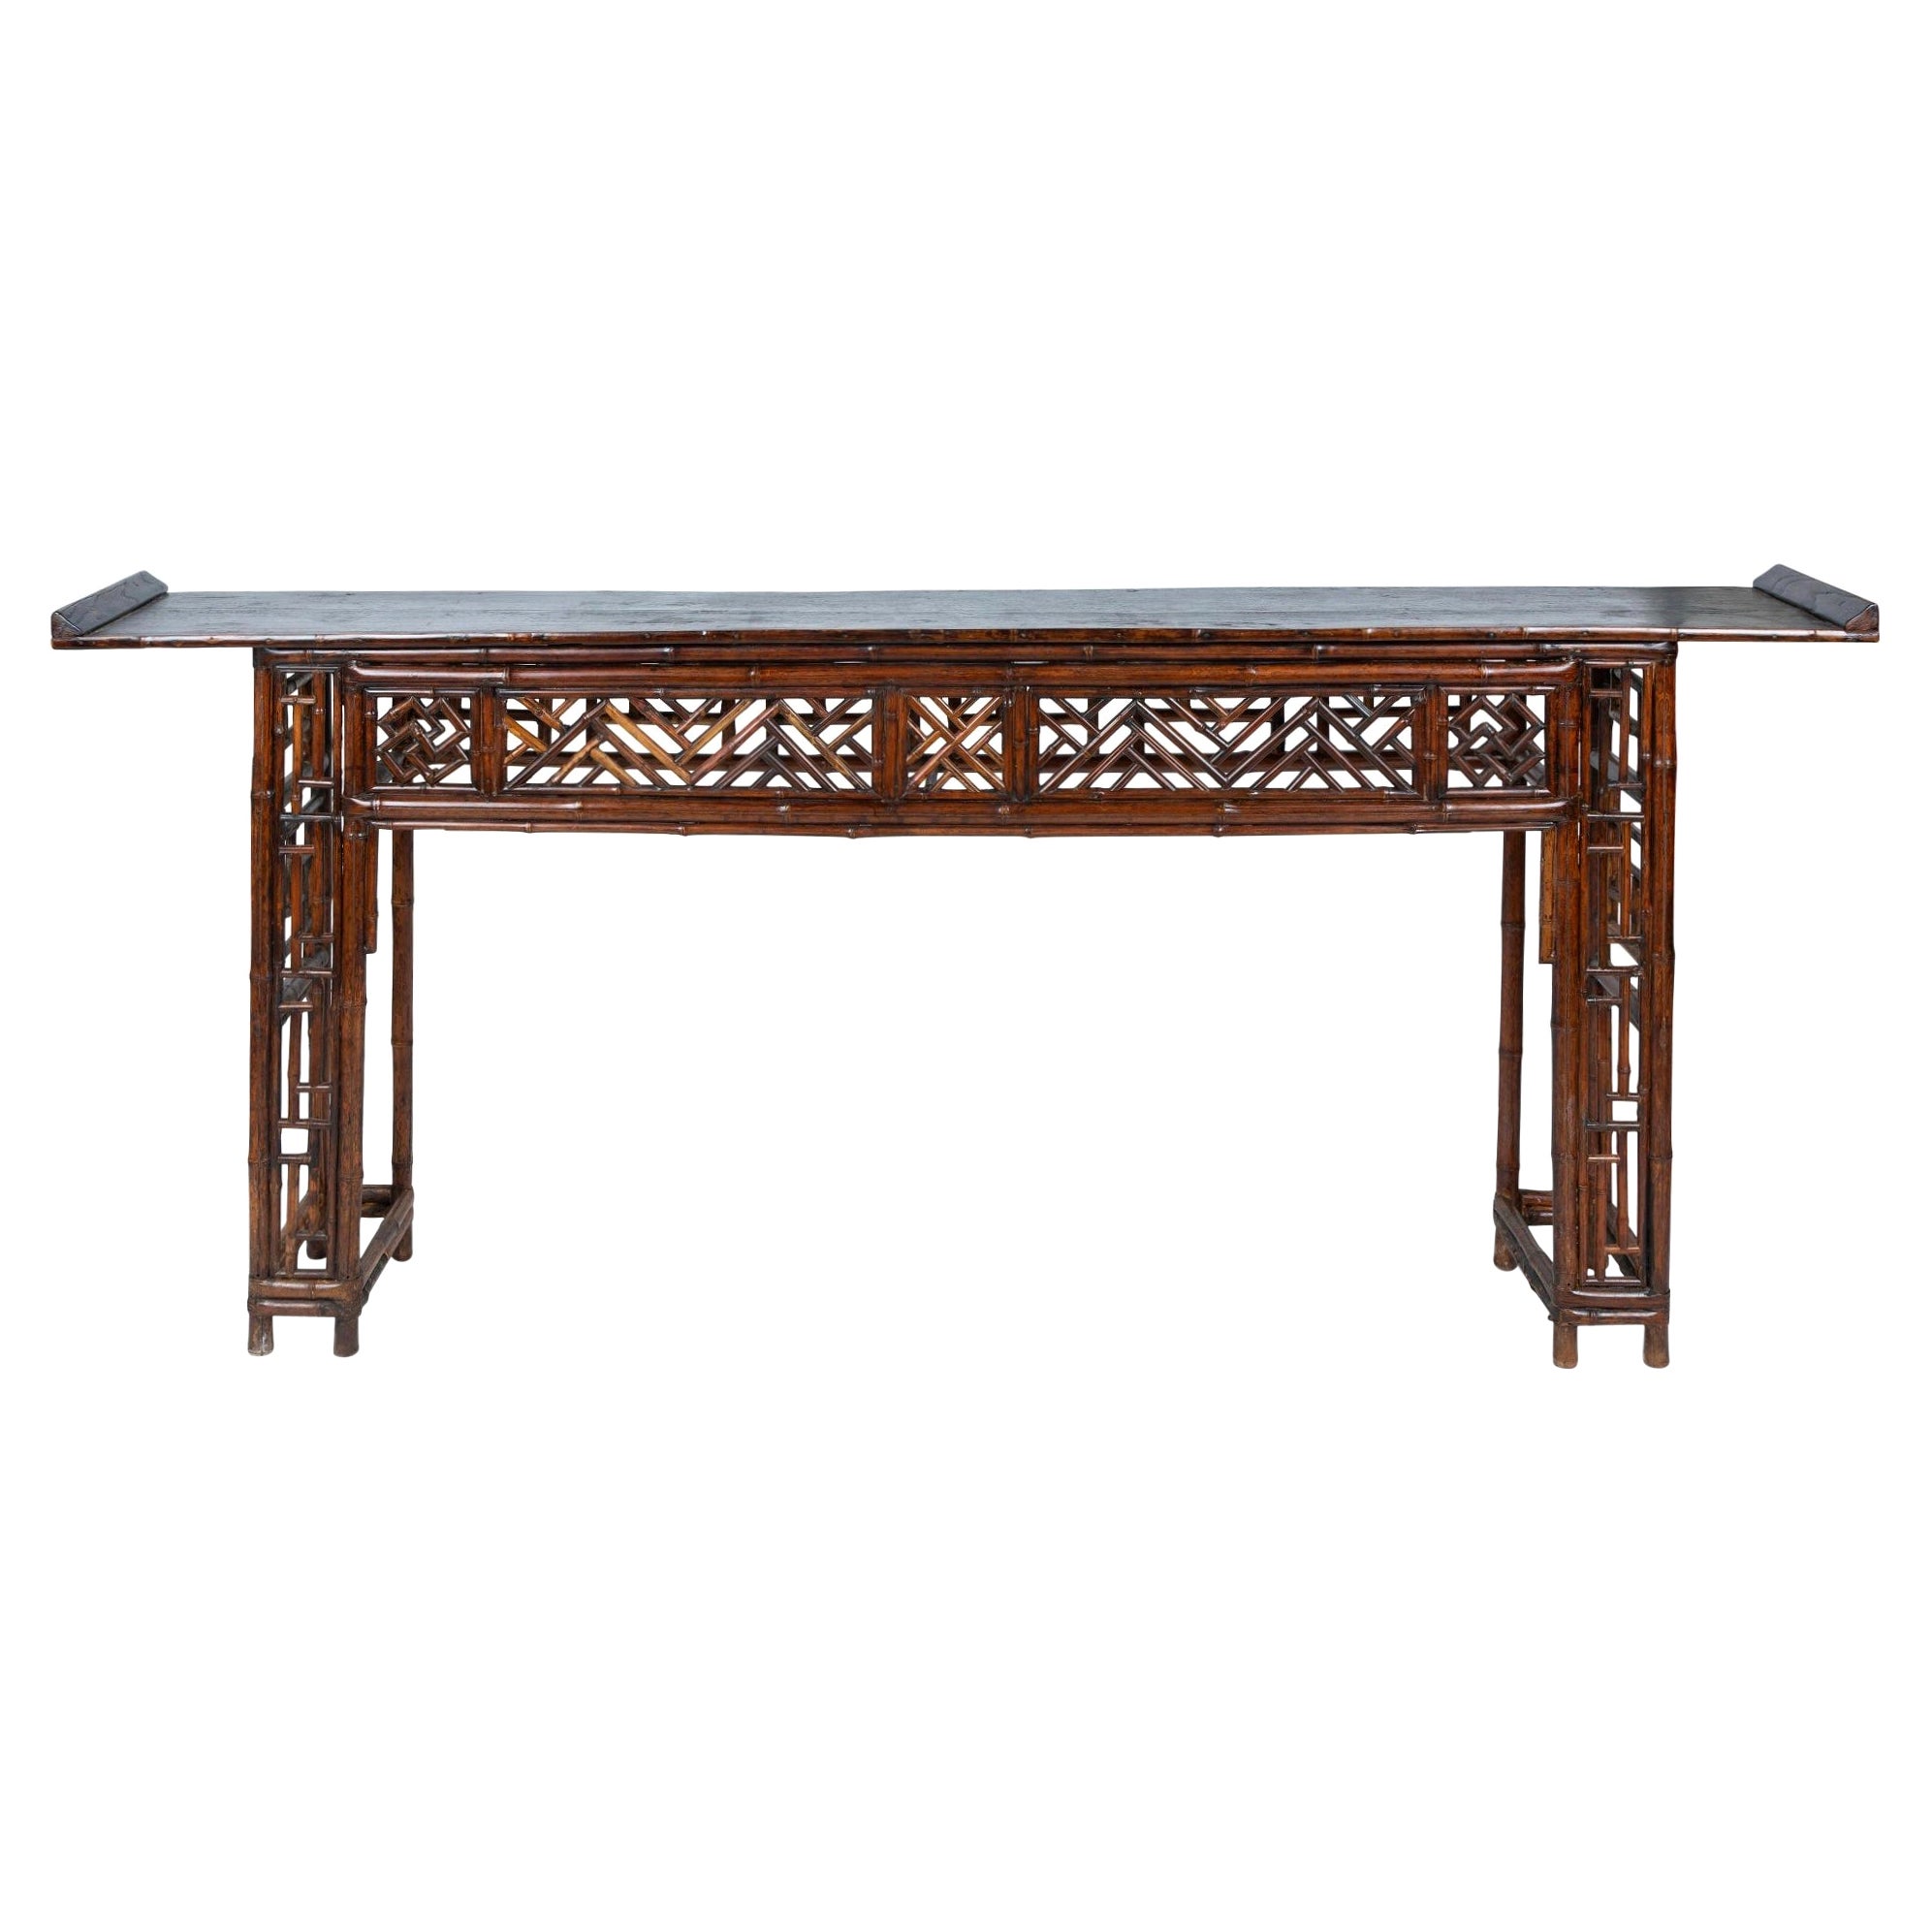 19th Century Chinese Bamboo-Carved Console Table